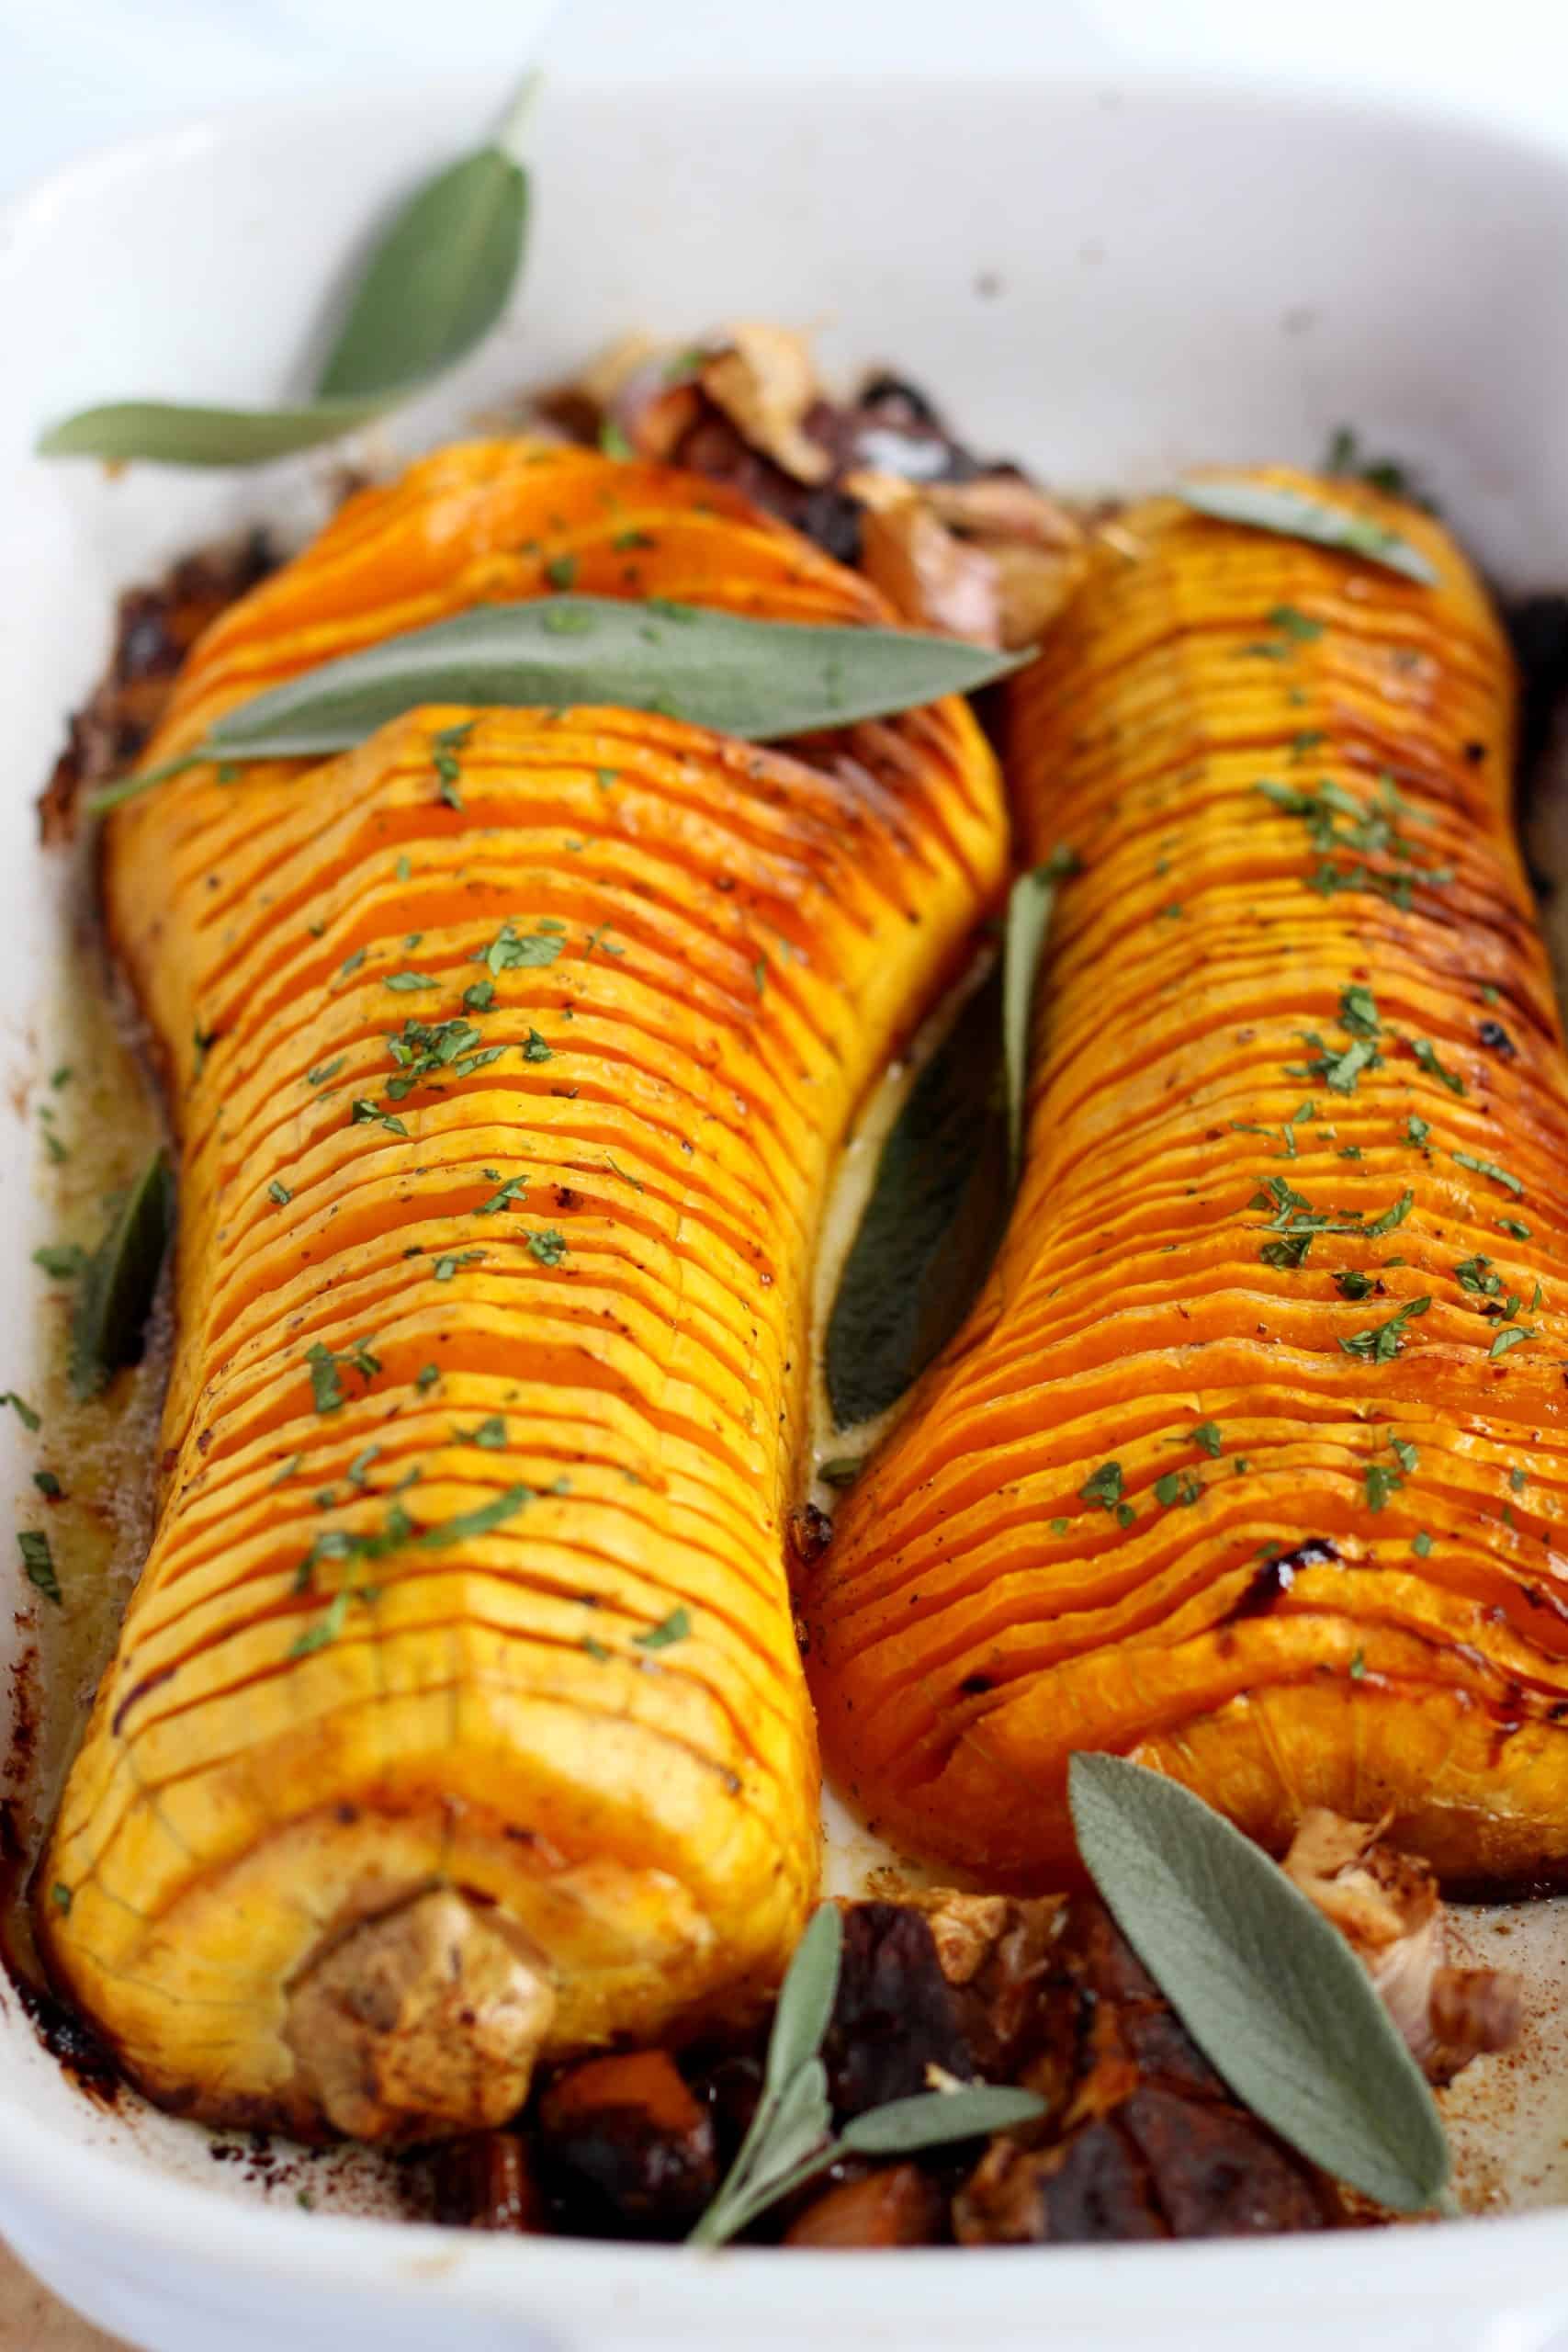 baked hasselback butternut squash with sarfan leaves and galic bulbes